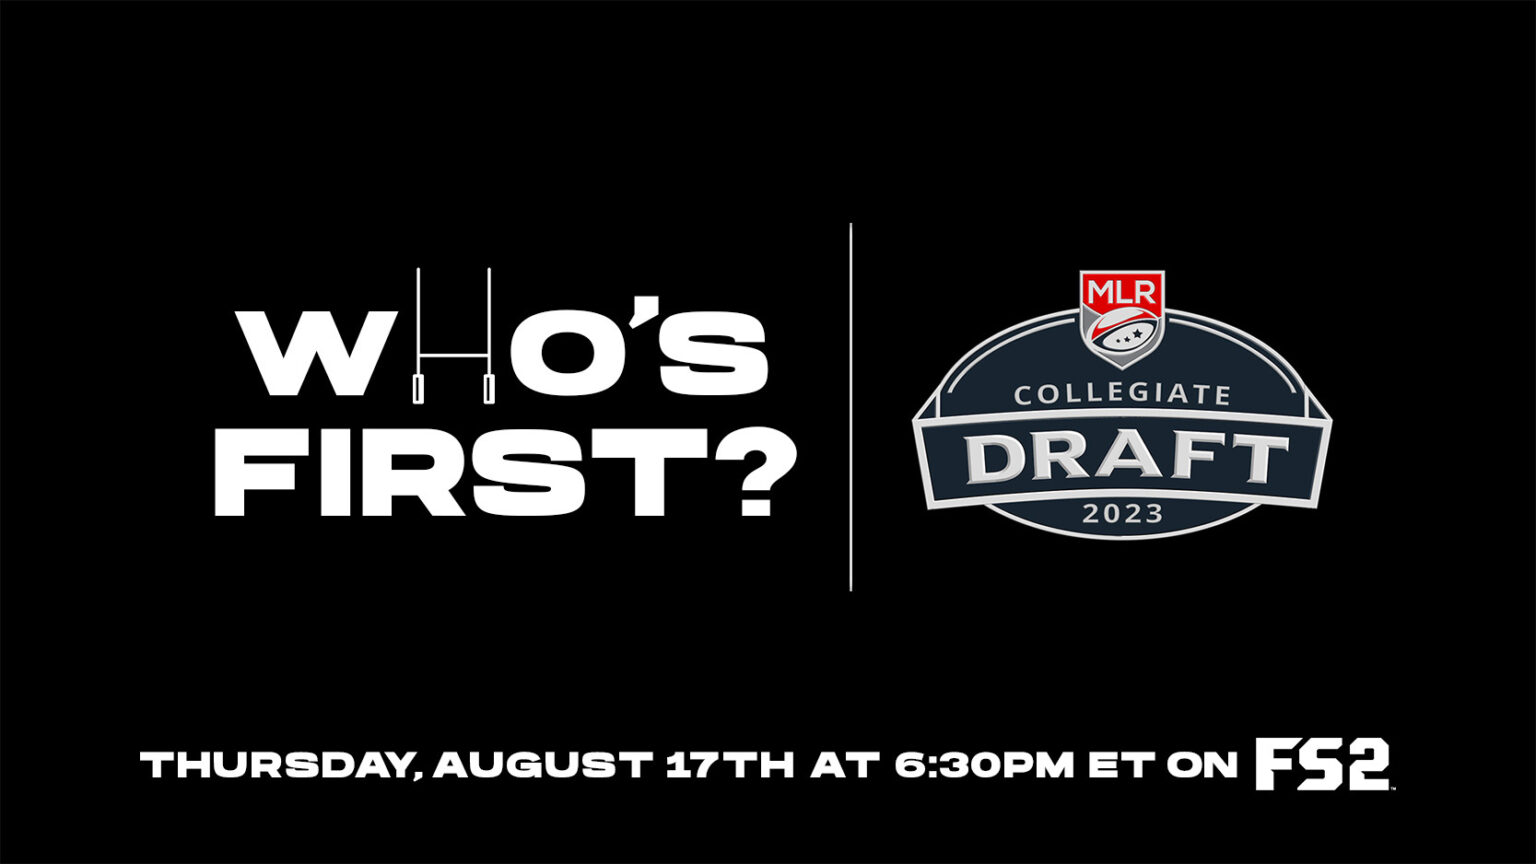 MAJOR LEAGUE RUGBY 2023 COLLEGIATE DRAFT SET FOR AUGUST 17 AT 6:30 PM ET ON FS2